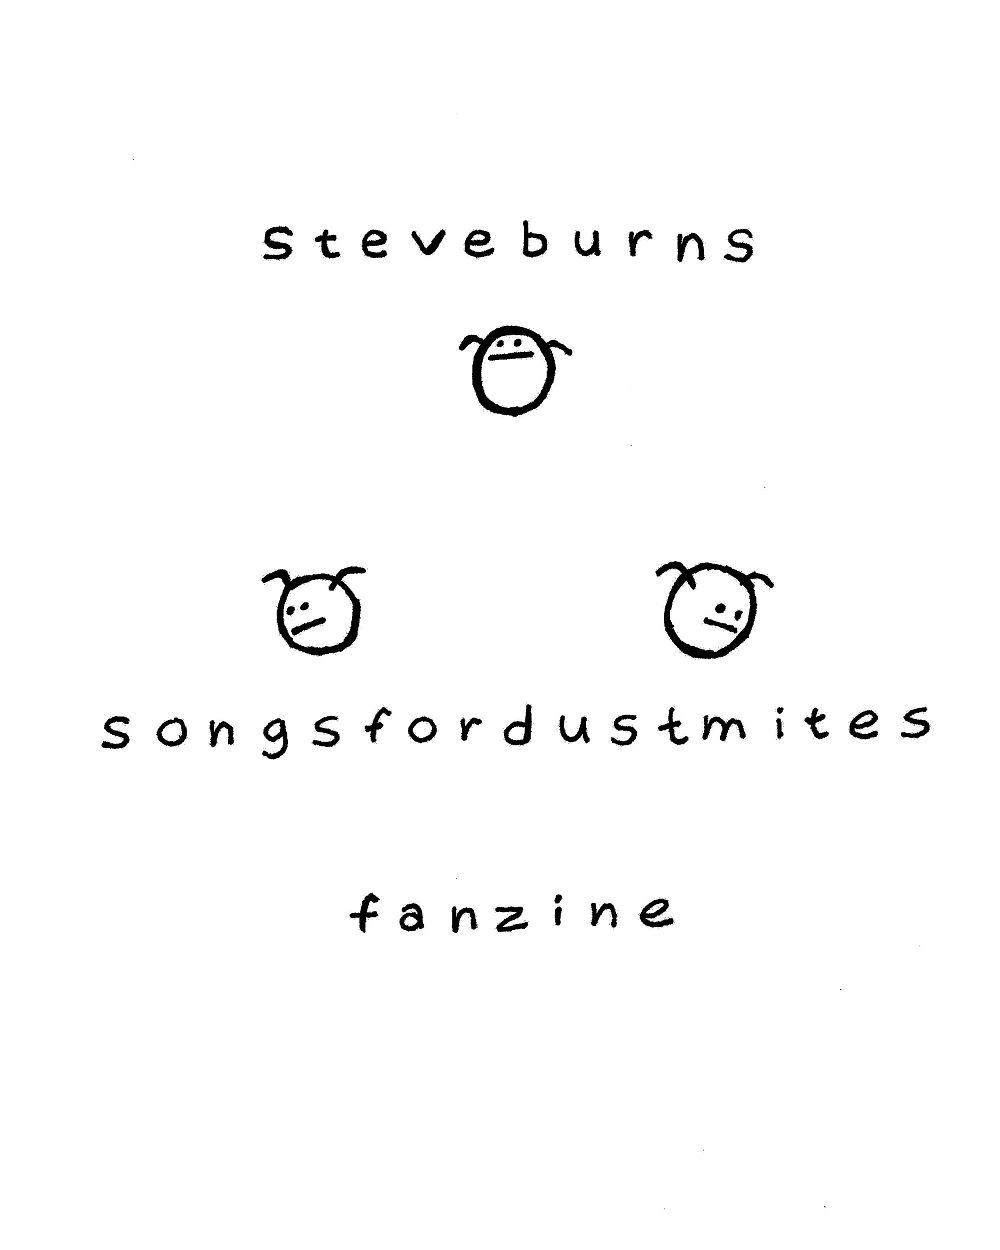 A drawing consisting of three dustmites forming a triangle. Above them it says 'steve burns.' Below them it says 'songs for dustmites' with 'fanzine' below that.